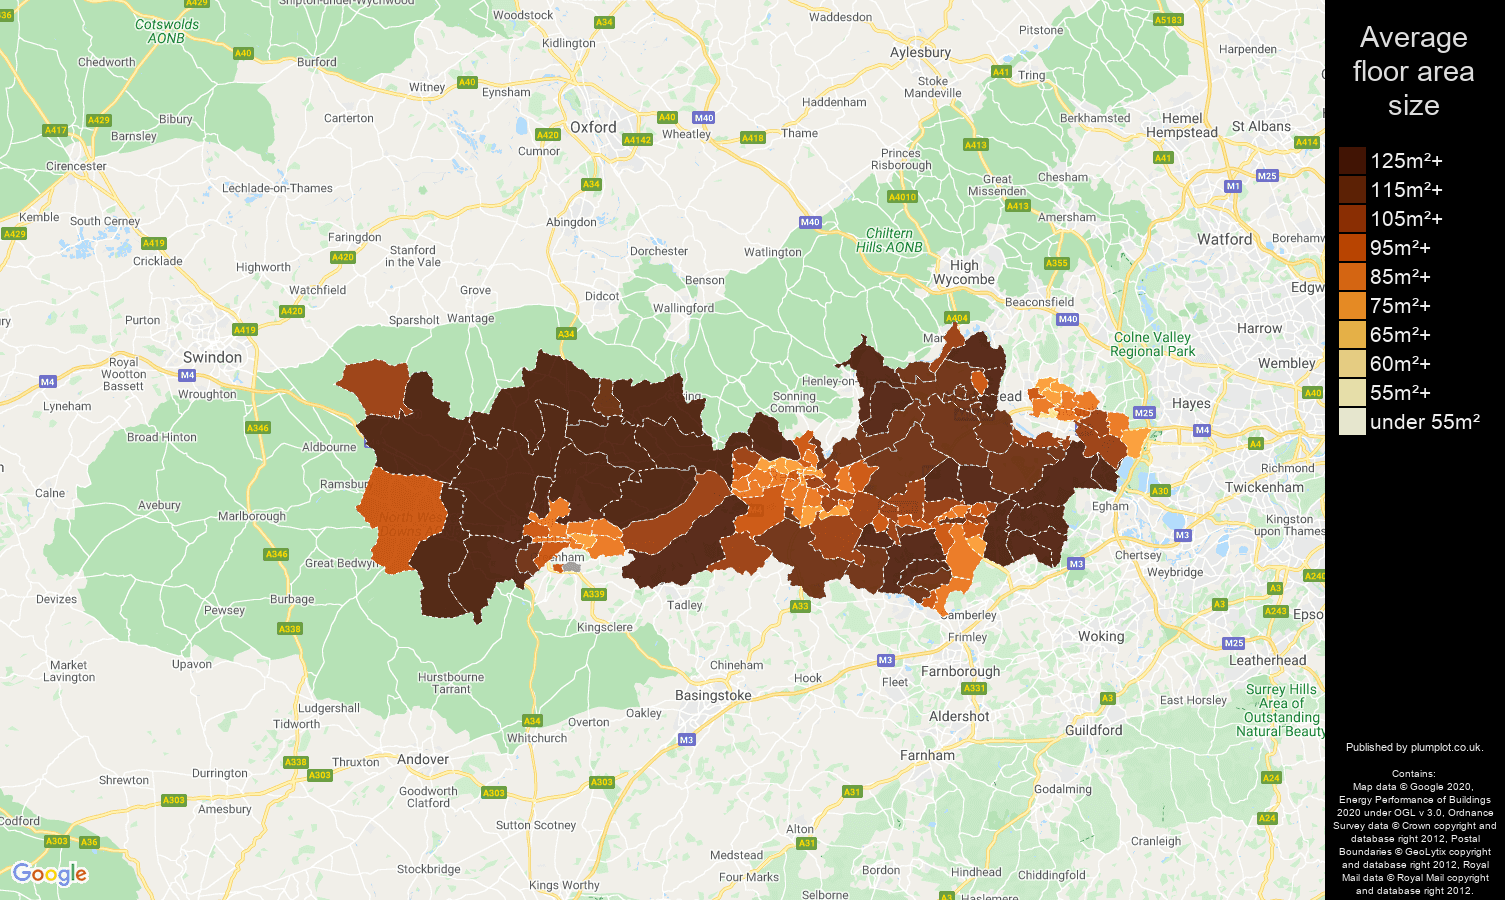 Berkshire map of average floor area size of houses